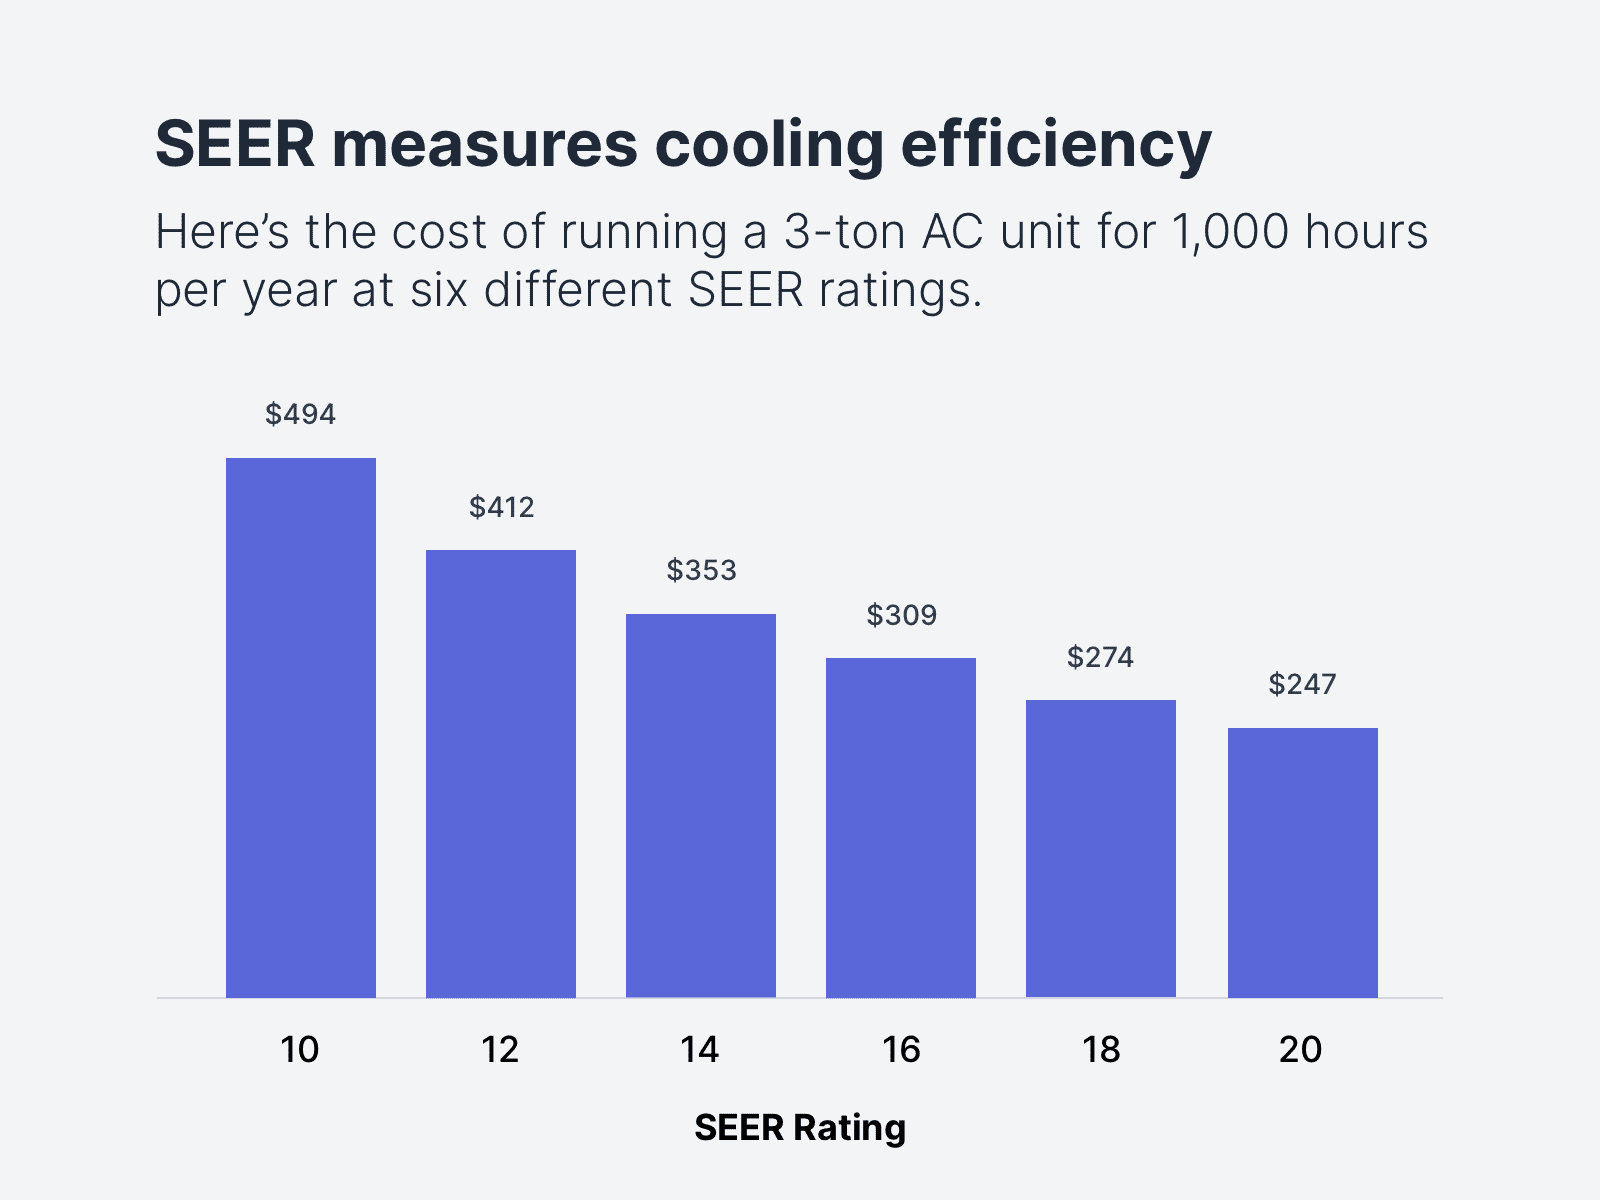 What is Considered a Good SEER Rating?